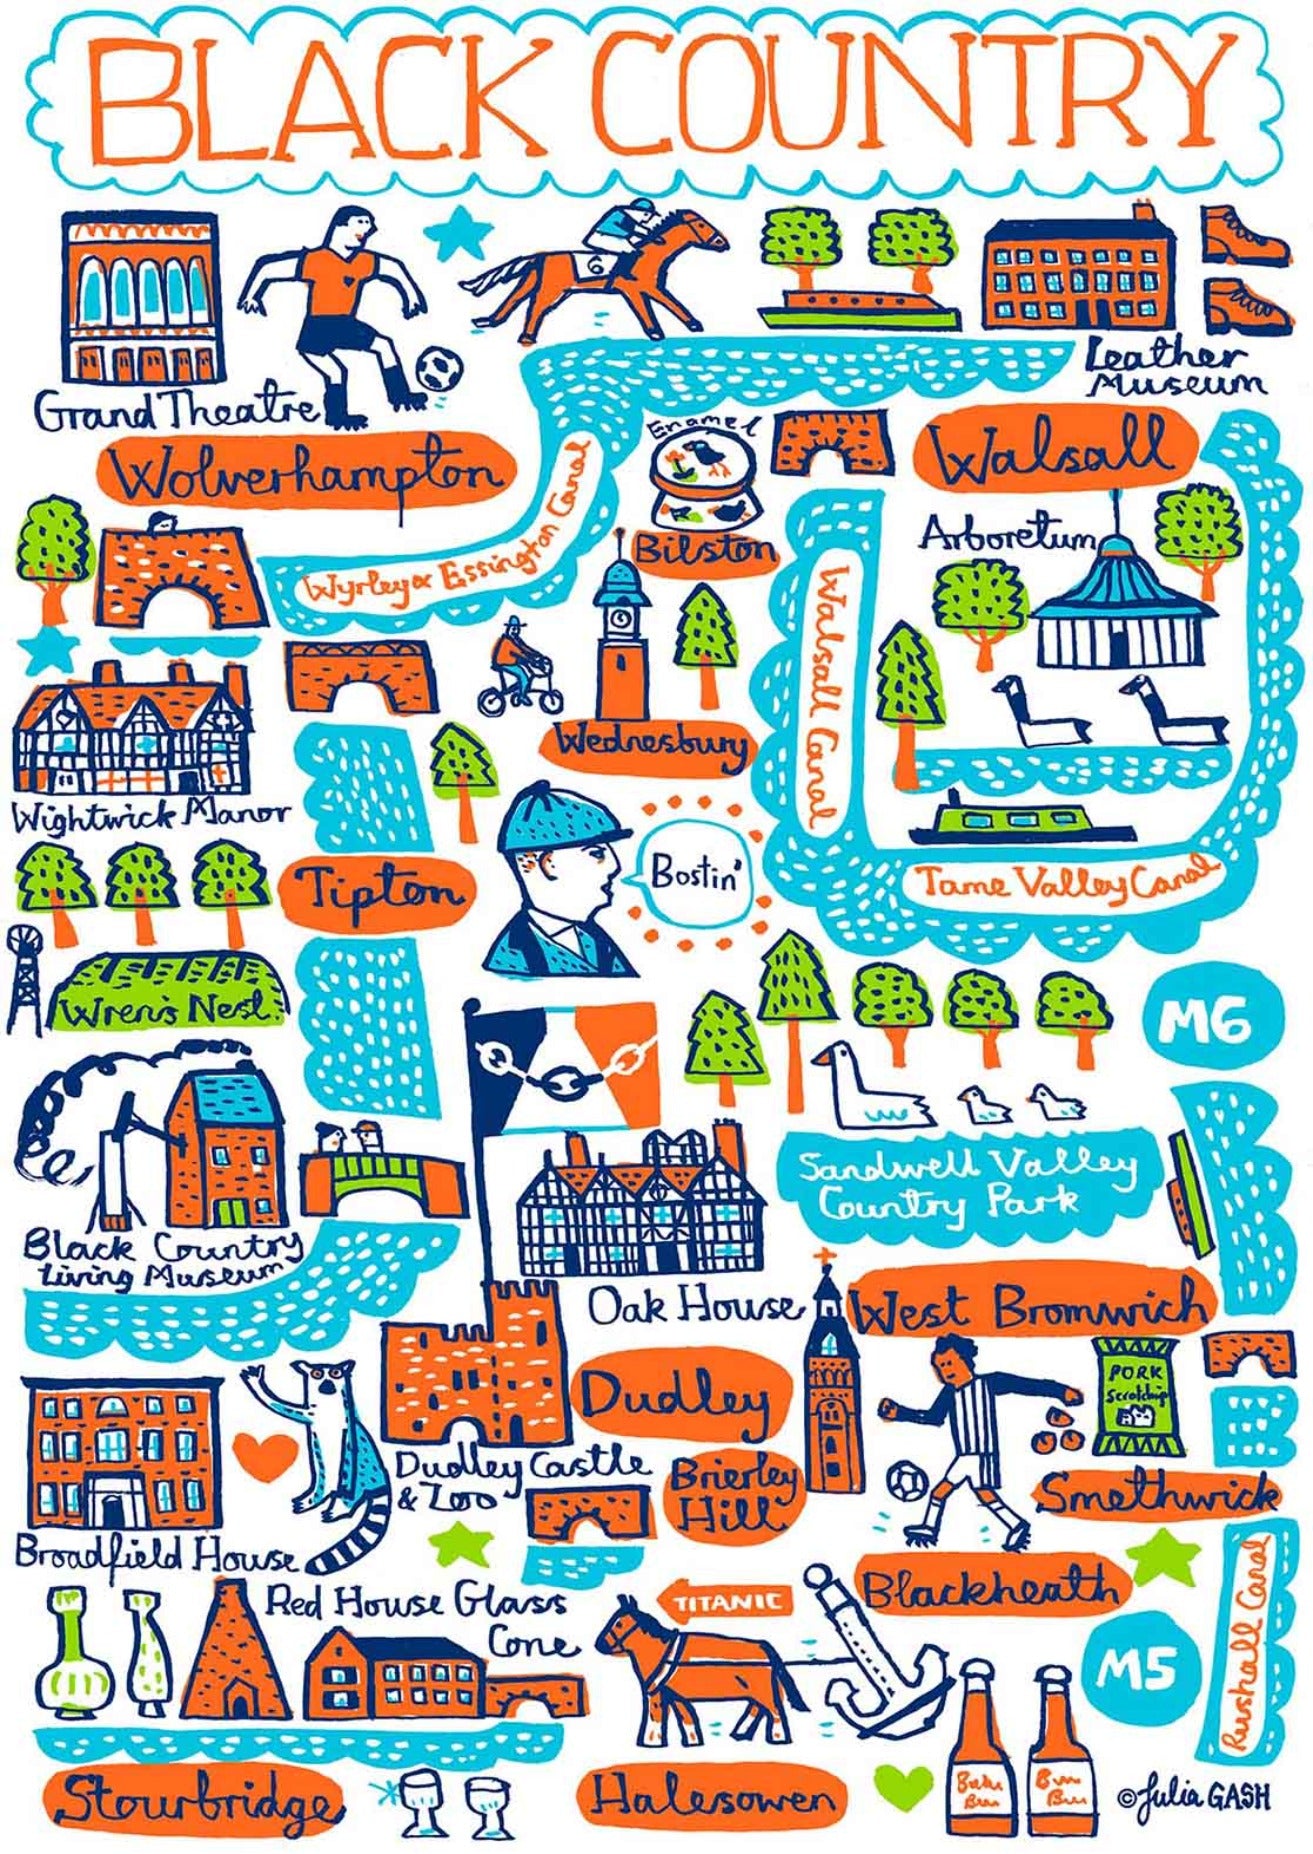 Black Country whimsical illustration by Julia Gash featuring Wolverhampton, Walsall, Stourbridge, Halesowen, Dudley, West Bromwich, Tipton